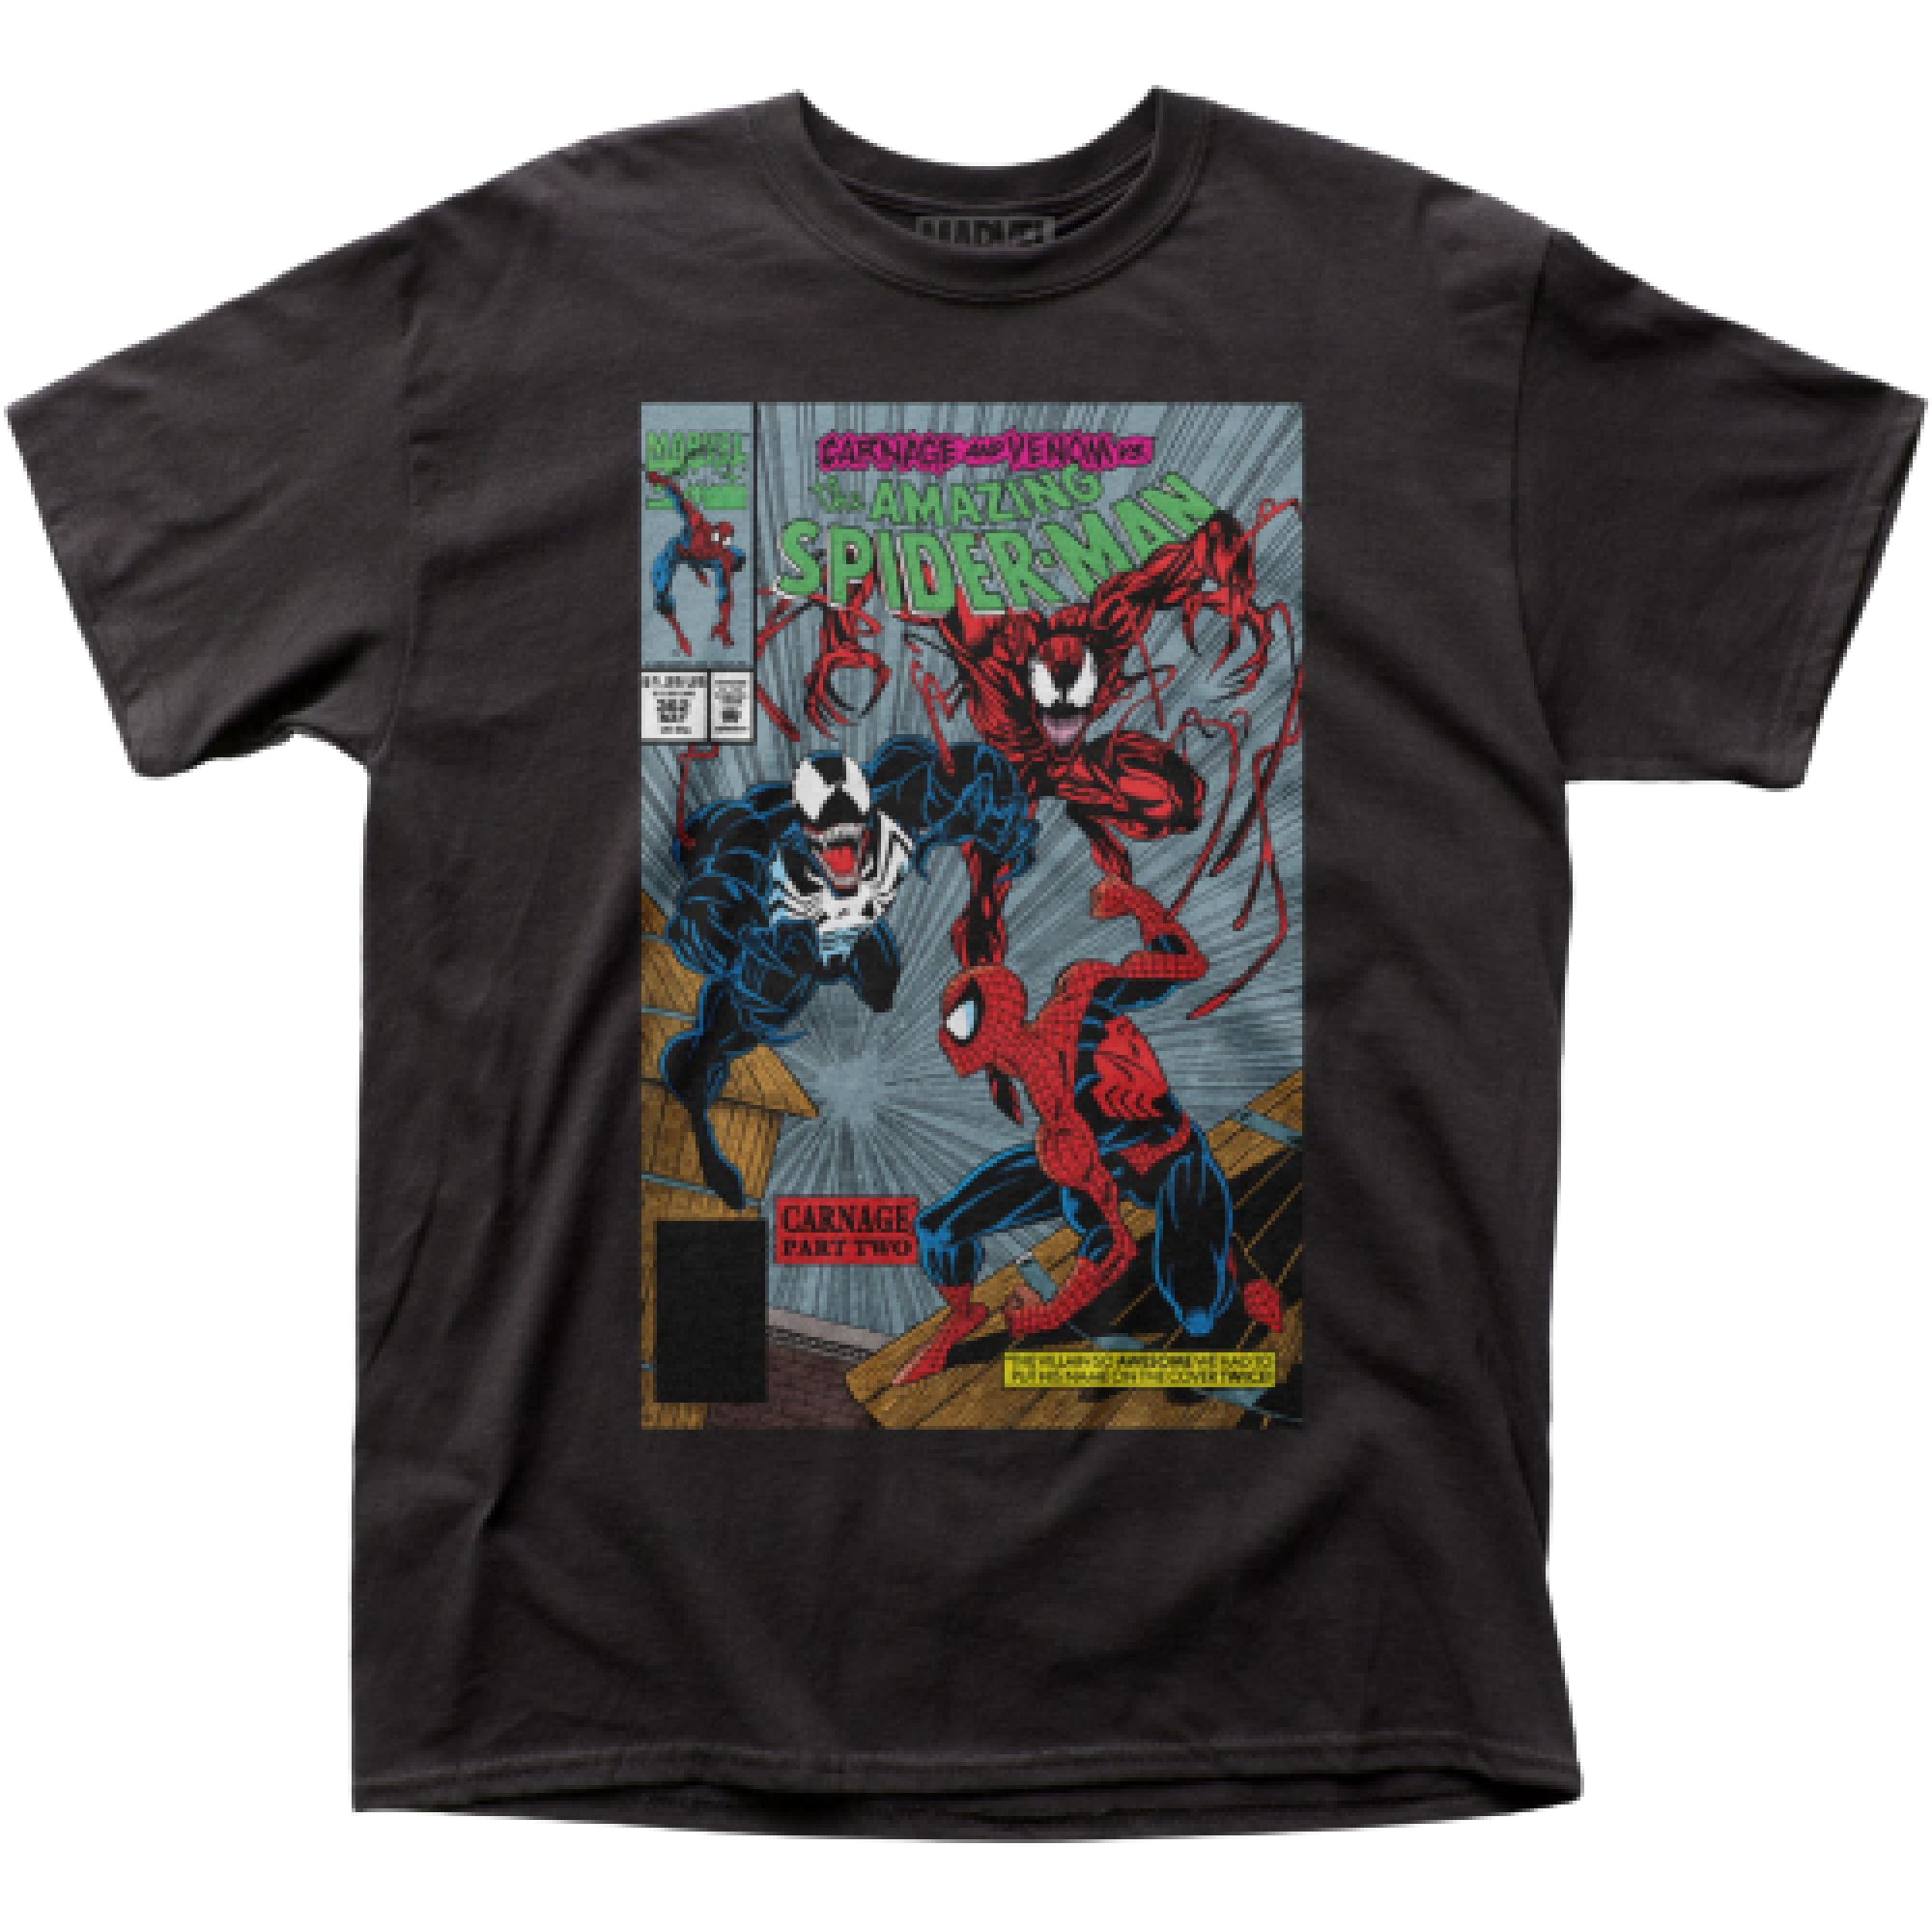 Spider-Man Venom vs Carnage Comic Cover Part Two T-Shirt Large 